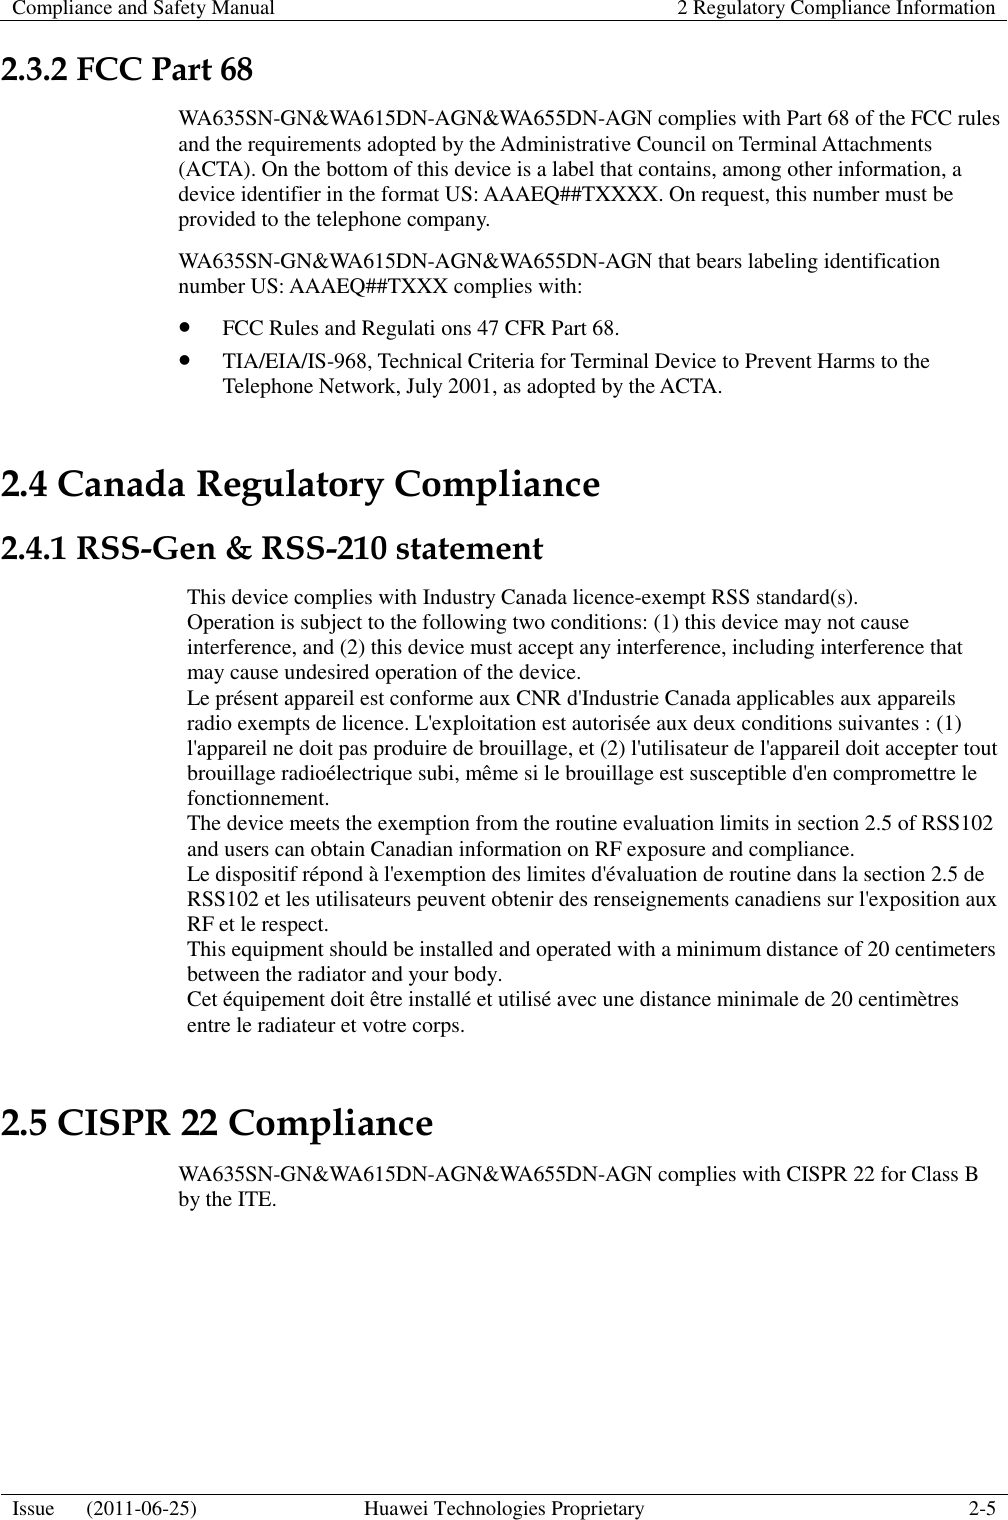 Compliance and Safety Manual 2 Regulatory Compliance Information  Issue      (2011-06-25) Huawei Technologies Proprietary 2-5  2.3.2 FCC Part 68 WA635SN-GN&amp;WA615DN-AGN&amp;WA655DN-AGN complies with Part 68 of the FCC rules and the requirements adopted by the Administrative Council on Terminal Attachments (ACTA). On the bottom of this device is a label that contains, among other information, a device identifier in the format US: AAAEQ##TXXXX. On request, this number must be provided to the telephone company. WA635SN-GN&amp;WA615DN-AGN&amp;WA655DN-AGN that bears labeling identification number US: AAAEQ##TXXX complies with:  FCC Rules and Regulati ons 47 CFR Part 68.  TIA/EIA/IS-968, Technical Criteria for Terminal Device to Prevent Harms to the Telephone Network, July 2001, as adopted by the ACTA. 2.4 Canada Regulatory Compliance 2.4.1 RSS-Gen &amp; RSS-210 statement This device complies with Industry Canada licence-exempt RSS standard(s). Operation is subject to the following two conditions: (1) this device may not cause interference, and (2) this device must accept any interference, including interference that may cause undesired operation of the device. Le présent appareil est conforme aux CNR d&apos;Industrie Canada applicables aux appareils radio exempts de licence. L&apos;exploitation est autorisée aux deux conditions suivantes : (1) l&apos;appareil ne doit pas produire de brouillage, et (2) l&apos;utilisateur de l&apos;appareil doit accepter tout brouillage radioélectrique subi, même si le brouillage est susceptible d&apos;en compromettre le fonctionnement.   The device meets the exemption from the routine evaluation limits in section 2.5 of RSS102 and users can obtain Canadian information on RF exposure and compliance.   Le dispositif répond à l&apos;exemption des limites d&apos;évaluation de routine dans la section 2.5 de RSS102 et les utilisateurs peuvent obtenir des renseignements canadiens sur l&apos;exposition aux RF et le respect.   This equipment should be installed and operated with a minimum distance of 20 centimeters between the radiator and your body.   Cet équipement doit être installé et utilisé avec une distance minimale de 20 centimètres entre le radiateur et votre corps. 2.5 CISPR 22 Compliance WA635SN-GN&amp;WA615DN-AGN&amp;WA655DN-AGN complies with CISPR 22 for Class B by the ITE. 